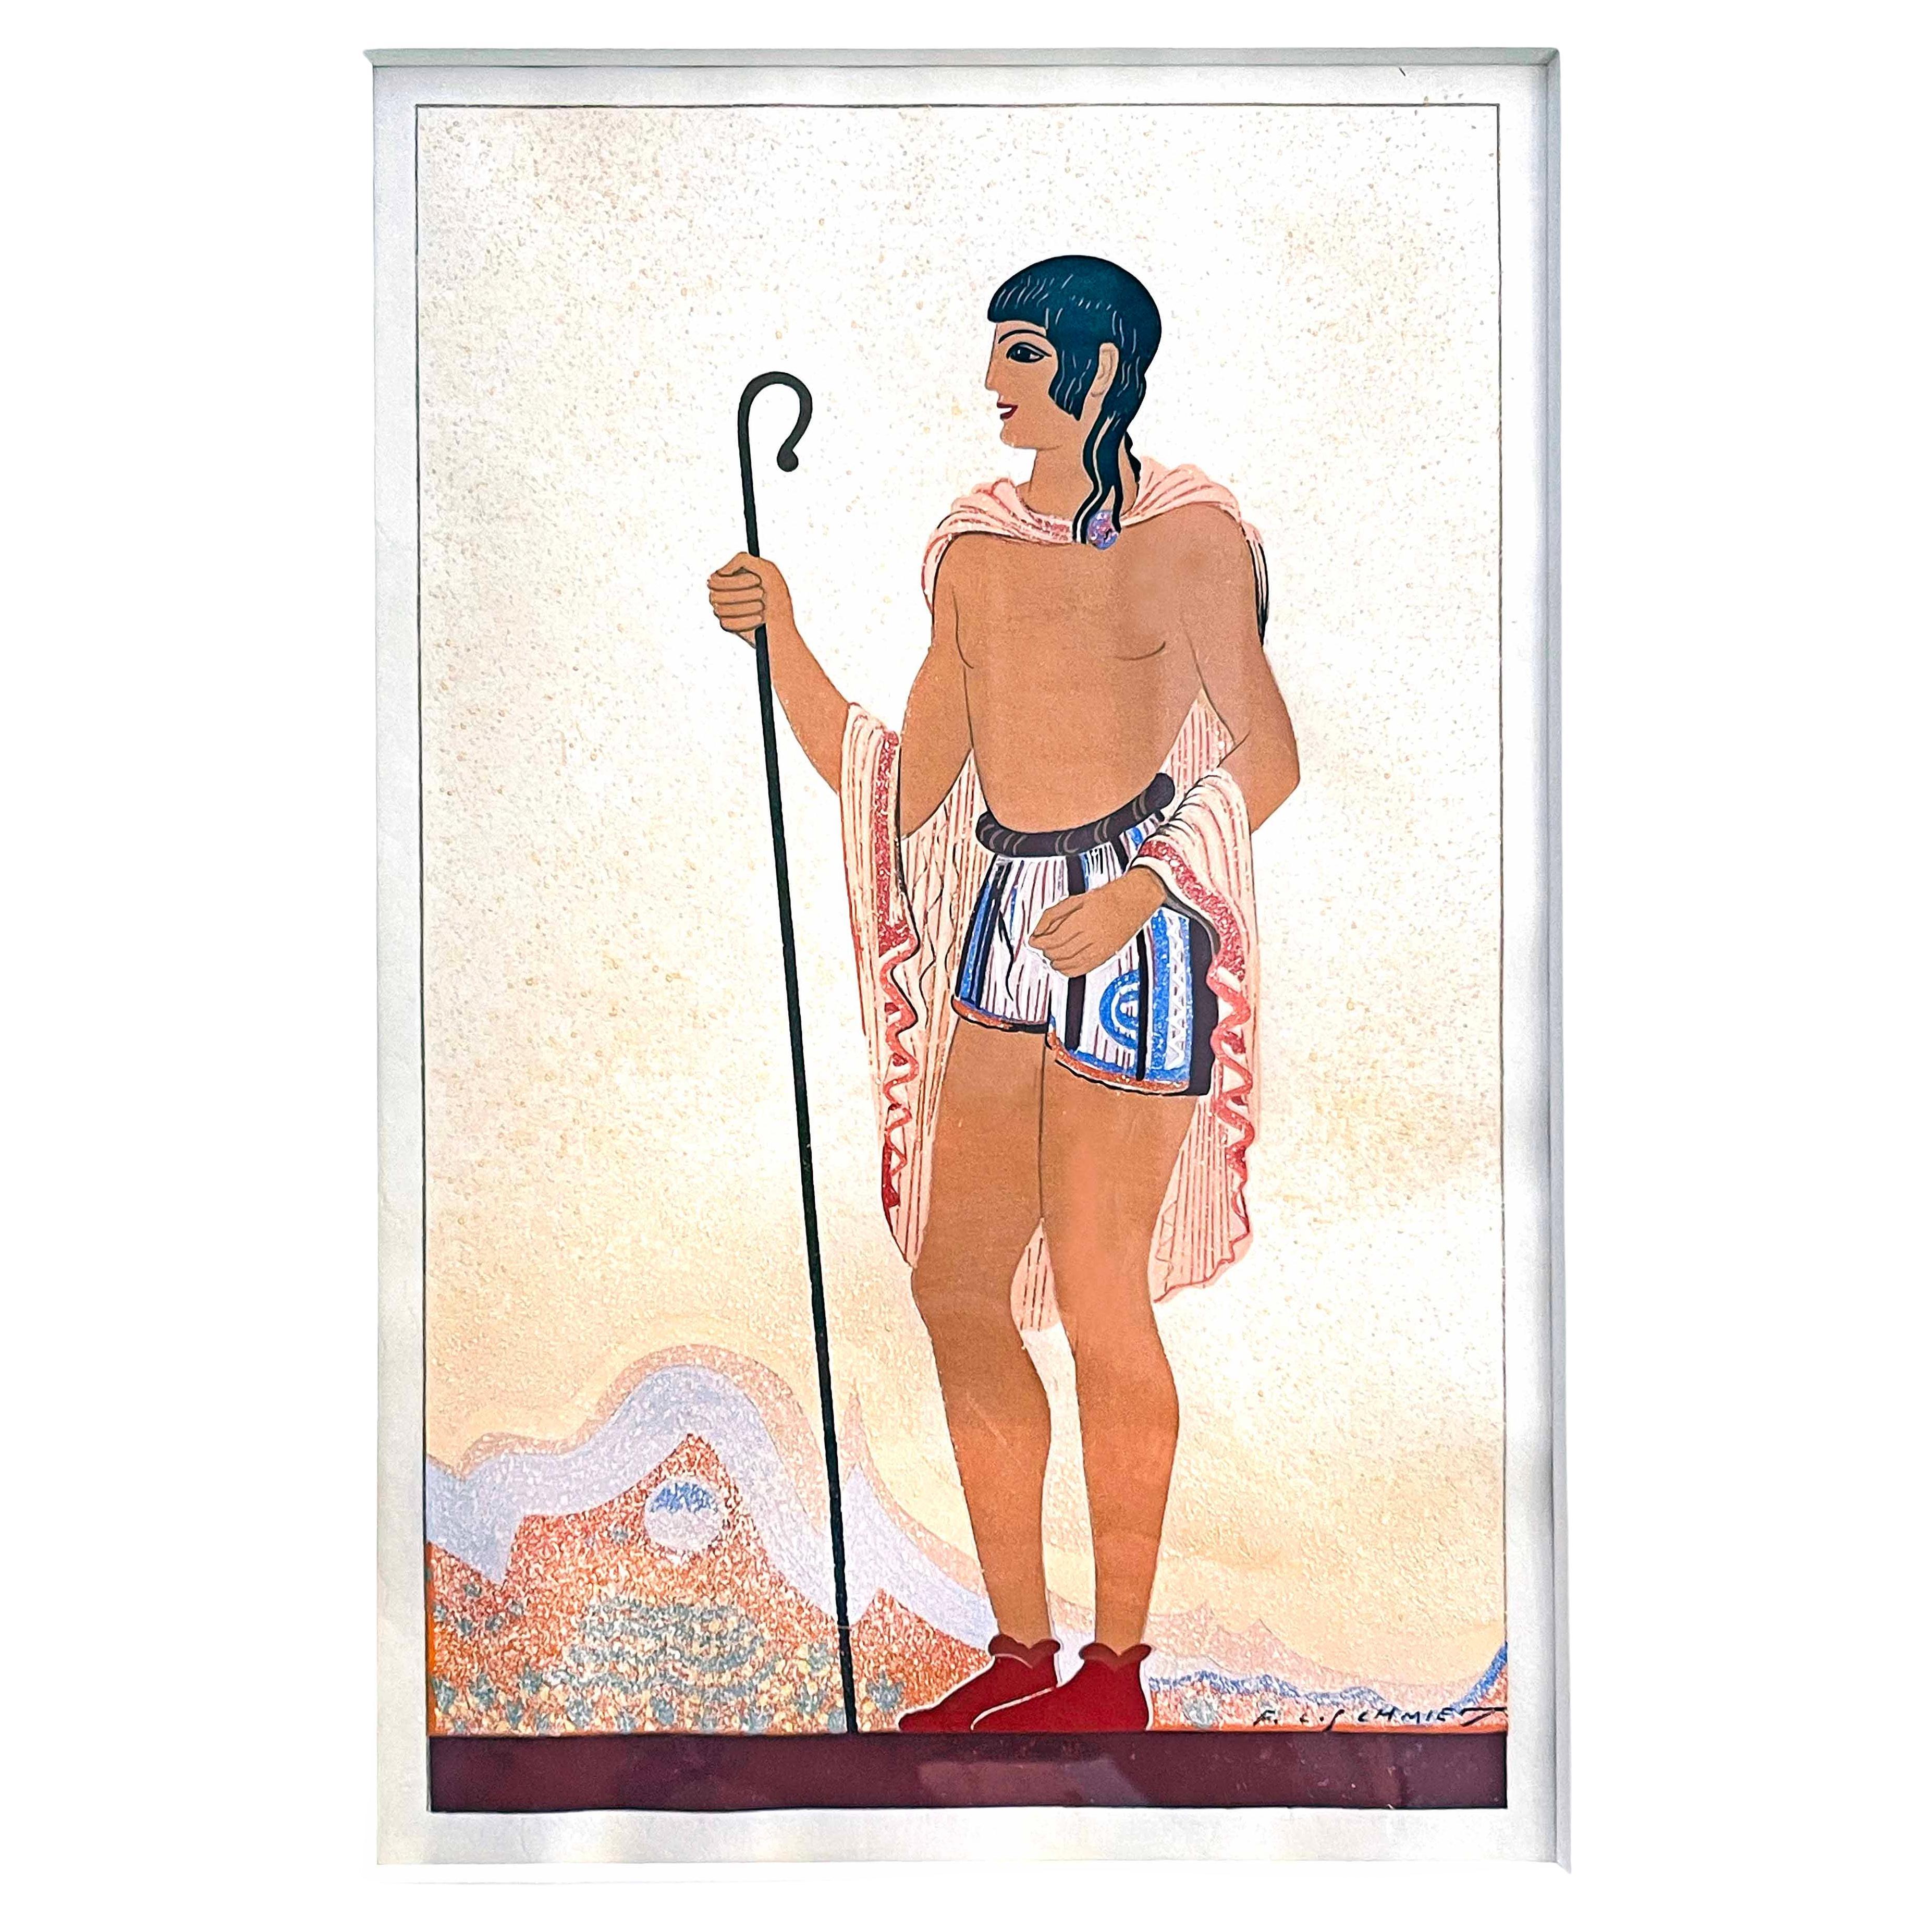 "Shepherd with Staff", High Style Art Deco Painting by Schmied, Book Illustrator